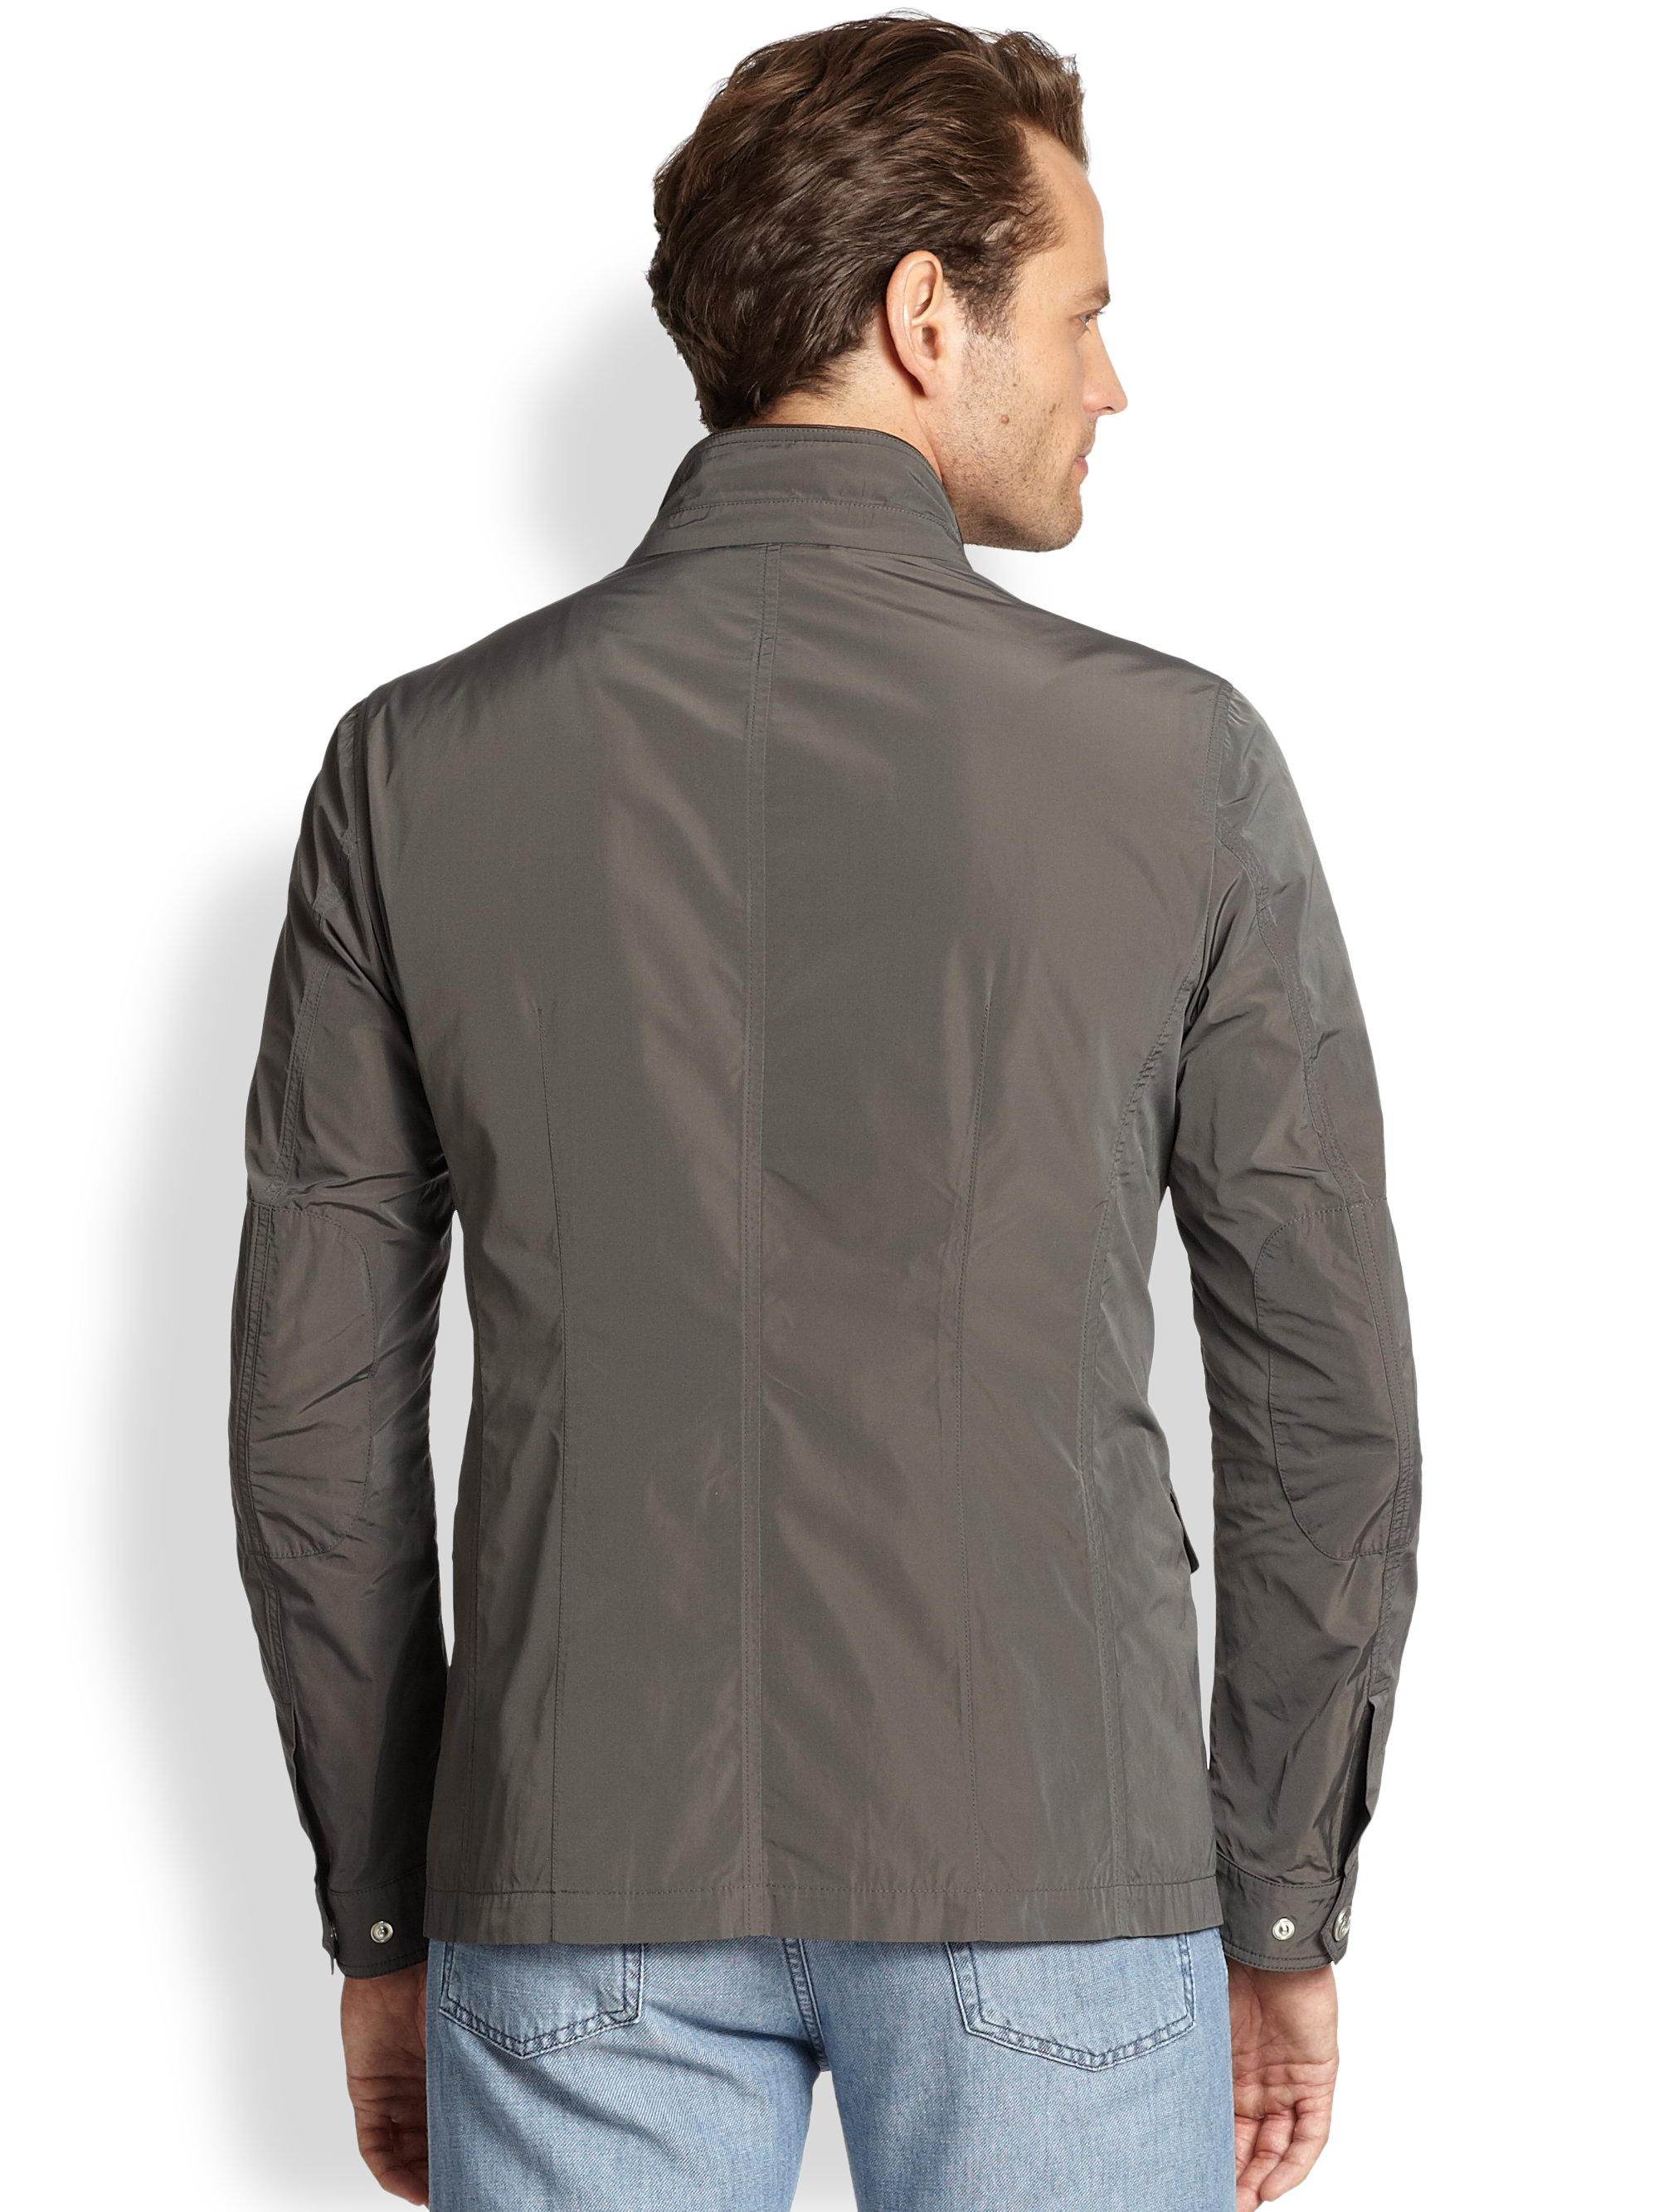 Canali Performance Nylon Jacket in Gray for Men - Lyst